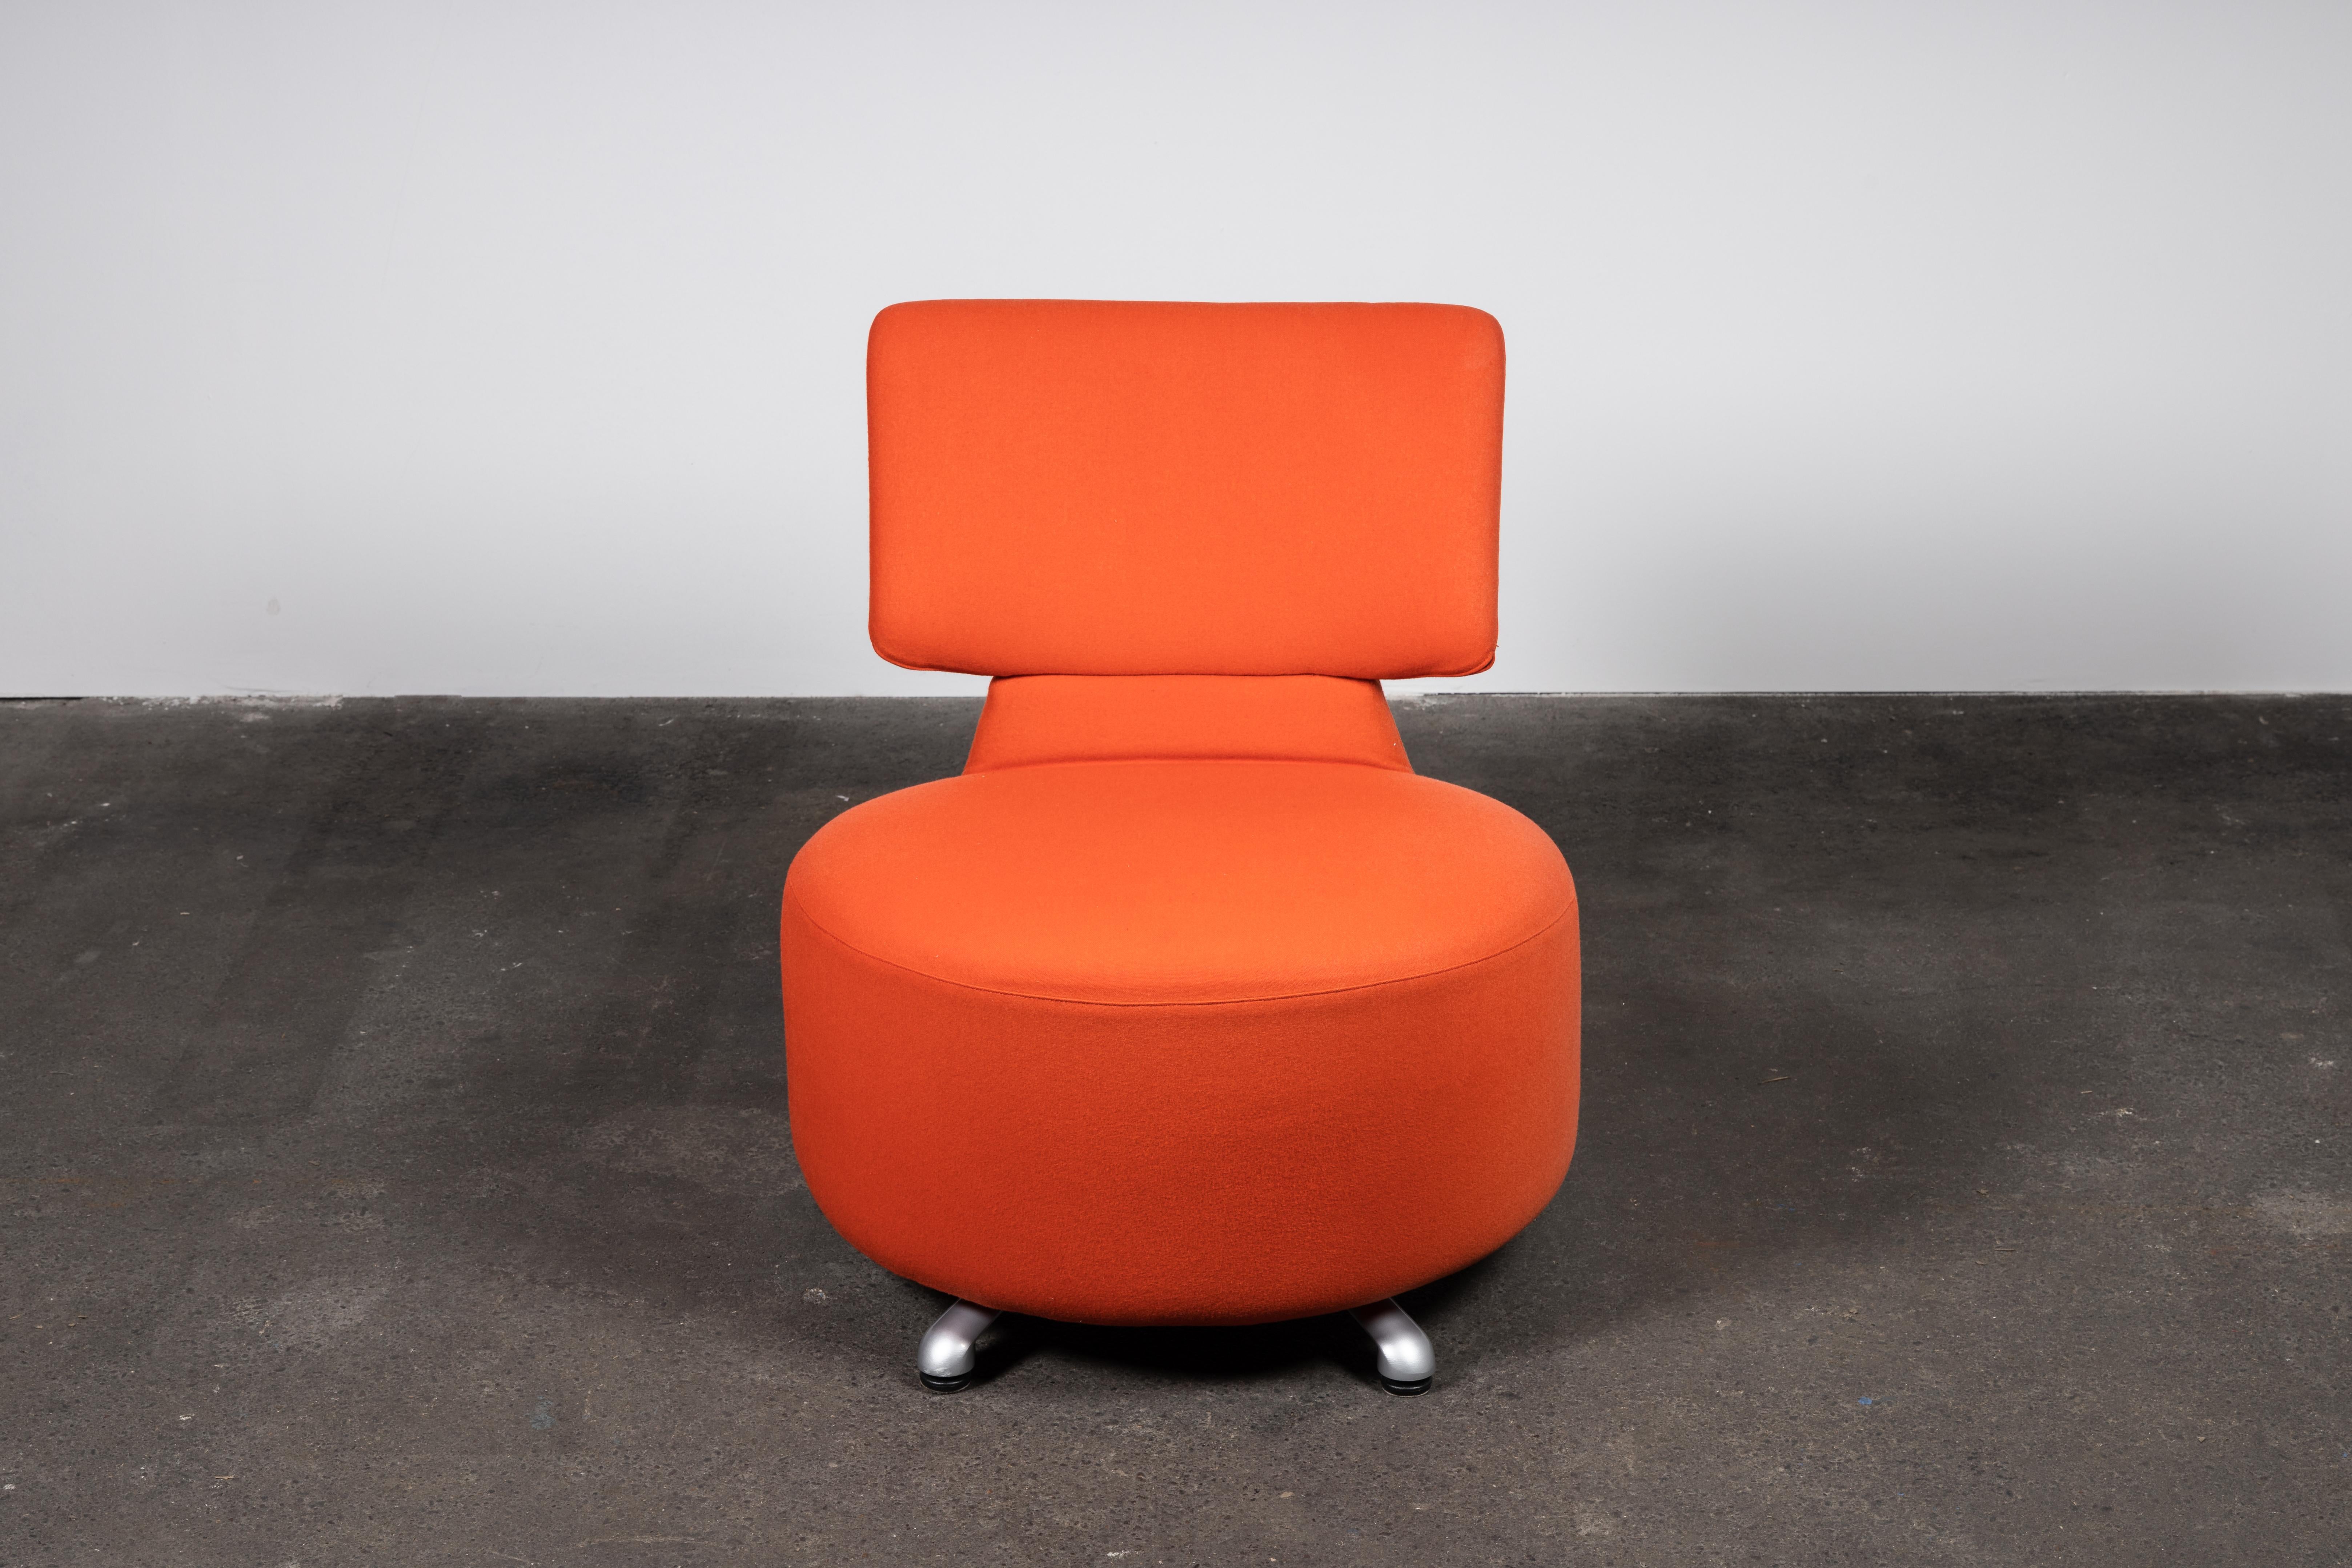 Huggable darling of the Postmodern office or living room. The K06 01 Aki chair by Toshiyuki Kita for Cassina adds a punch of comfortable style, informal and playful, yet capable of being perfectly professional all the while.

Ergonomic and angular